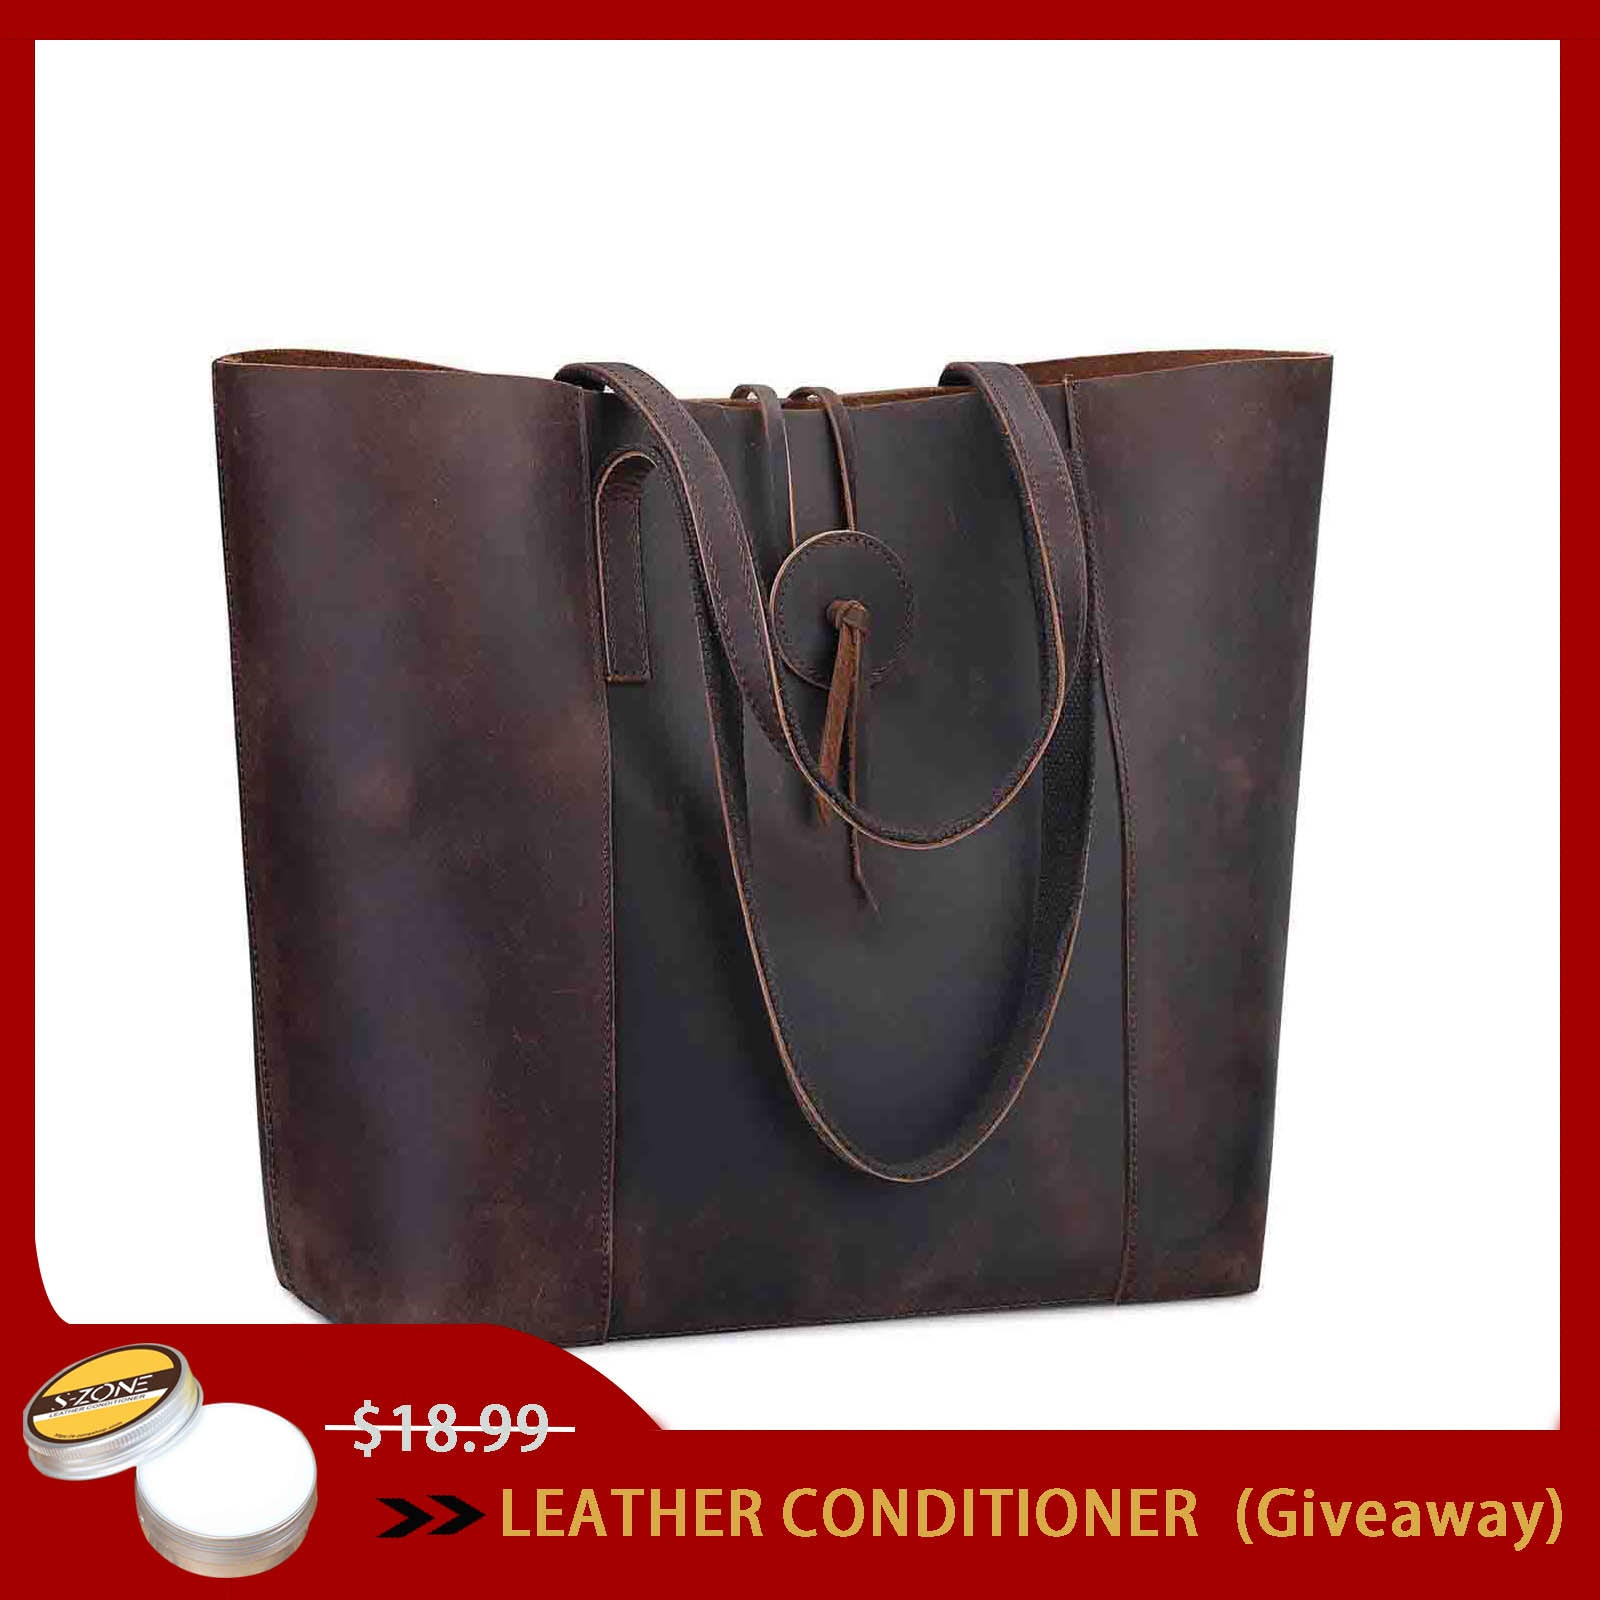 Women's Crazy Horse Leather Tote Bag